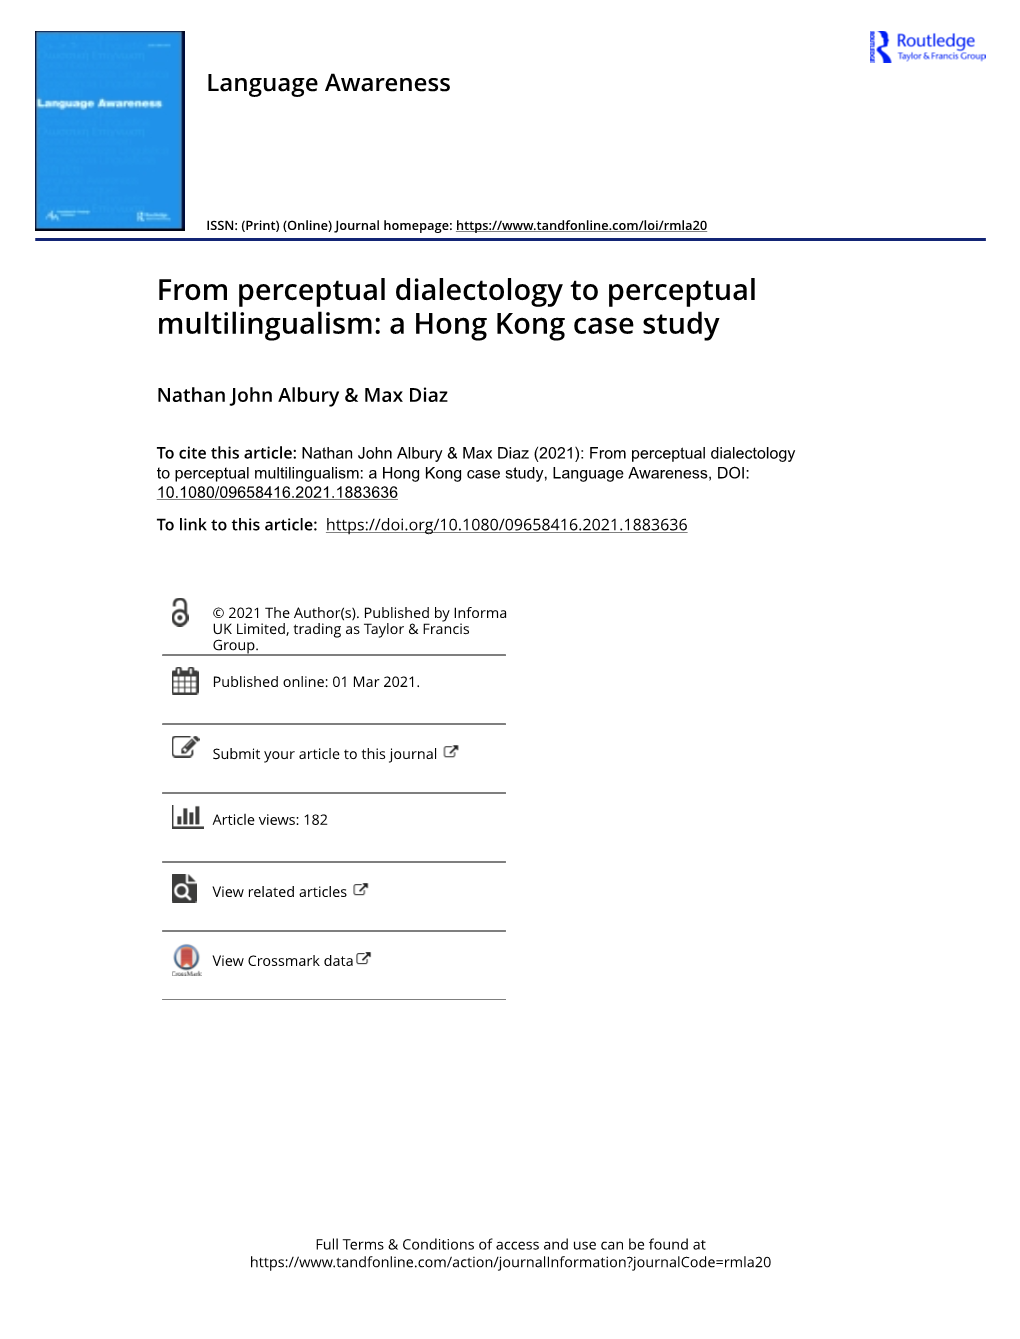 From Perceptual Dialectology to Perceptual Multilingualism: a Hong Kong Case Study